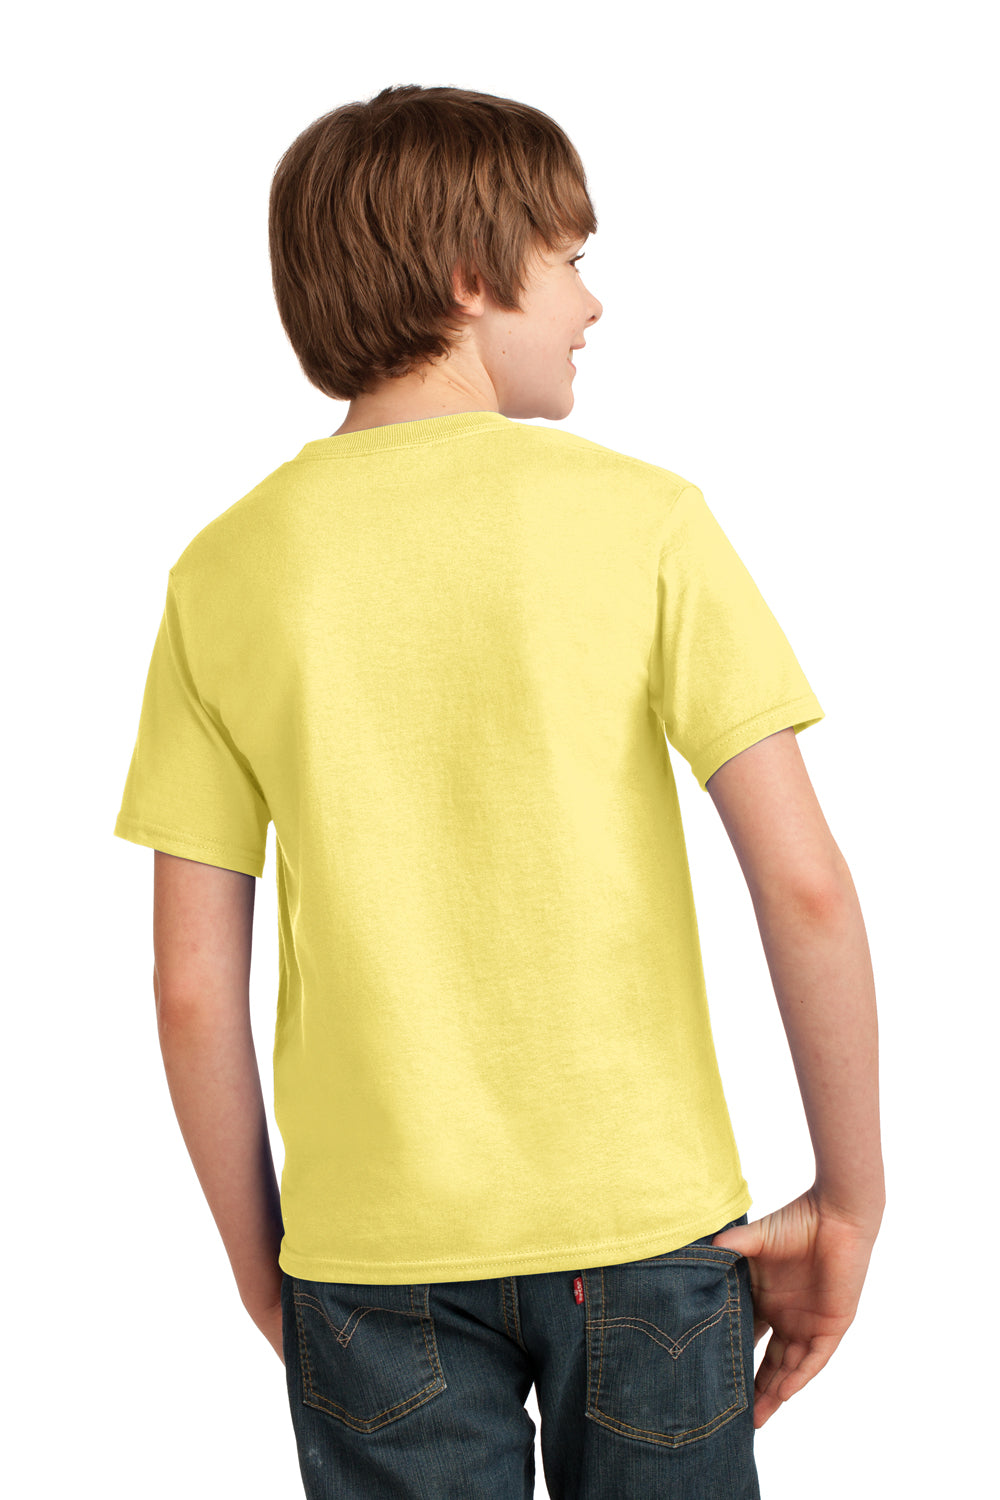 Port & Company PC61Y Youth Essential Short Sleeve Crewneck T-Shirt Yellow Back